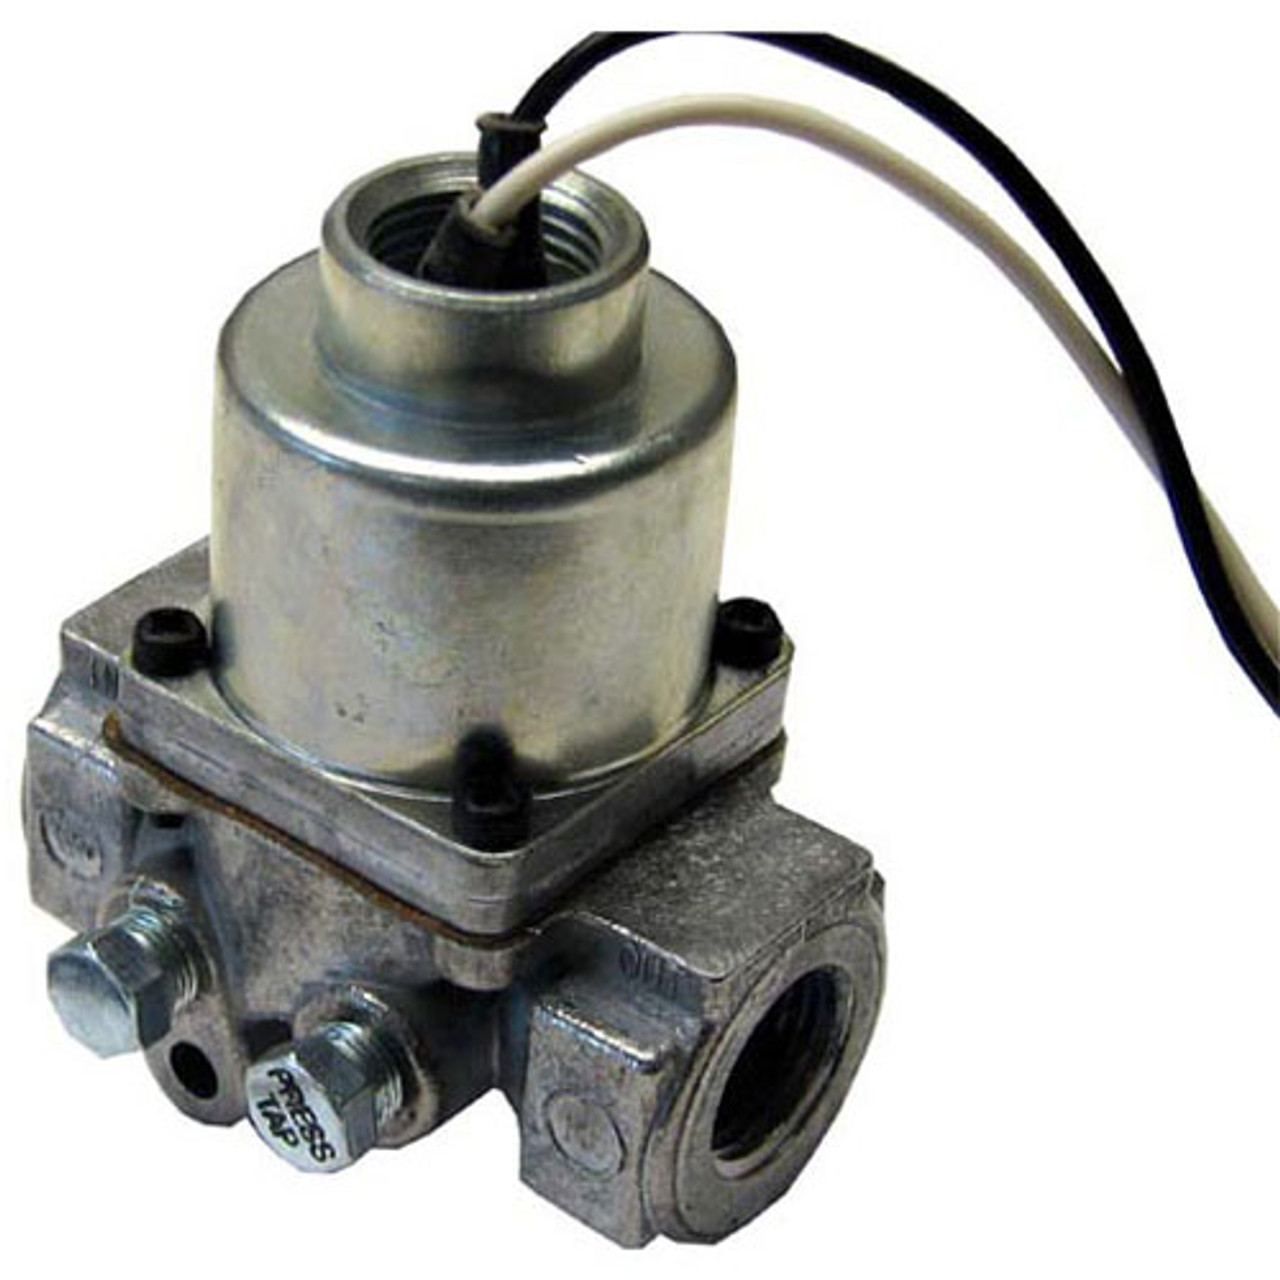 Solenoid Valve 120,V 1/2" Pipe - Replacement Part For Lang 80502-01